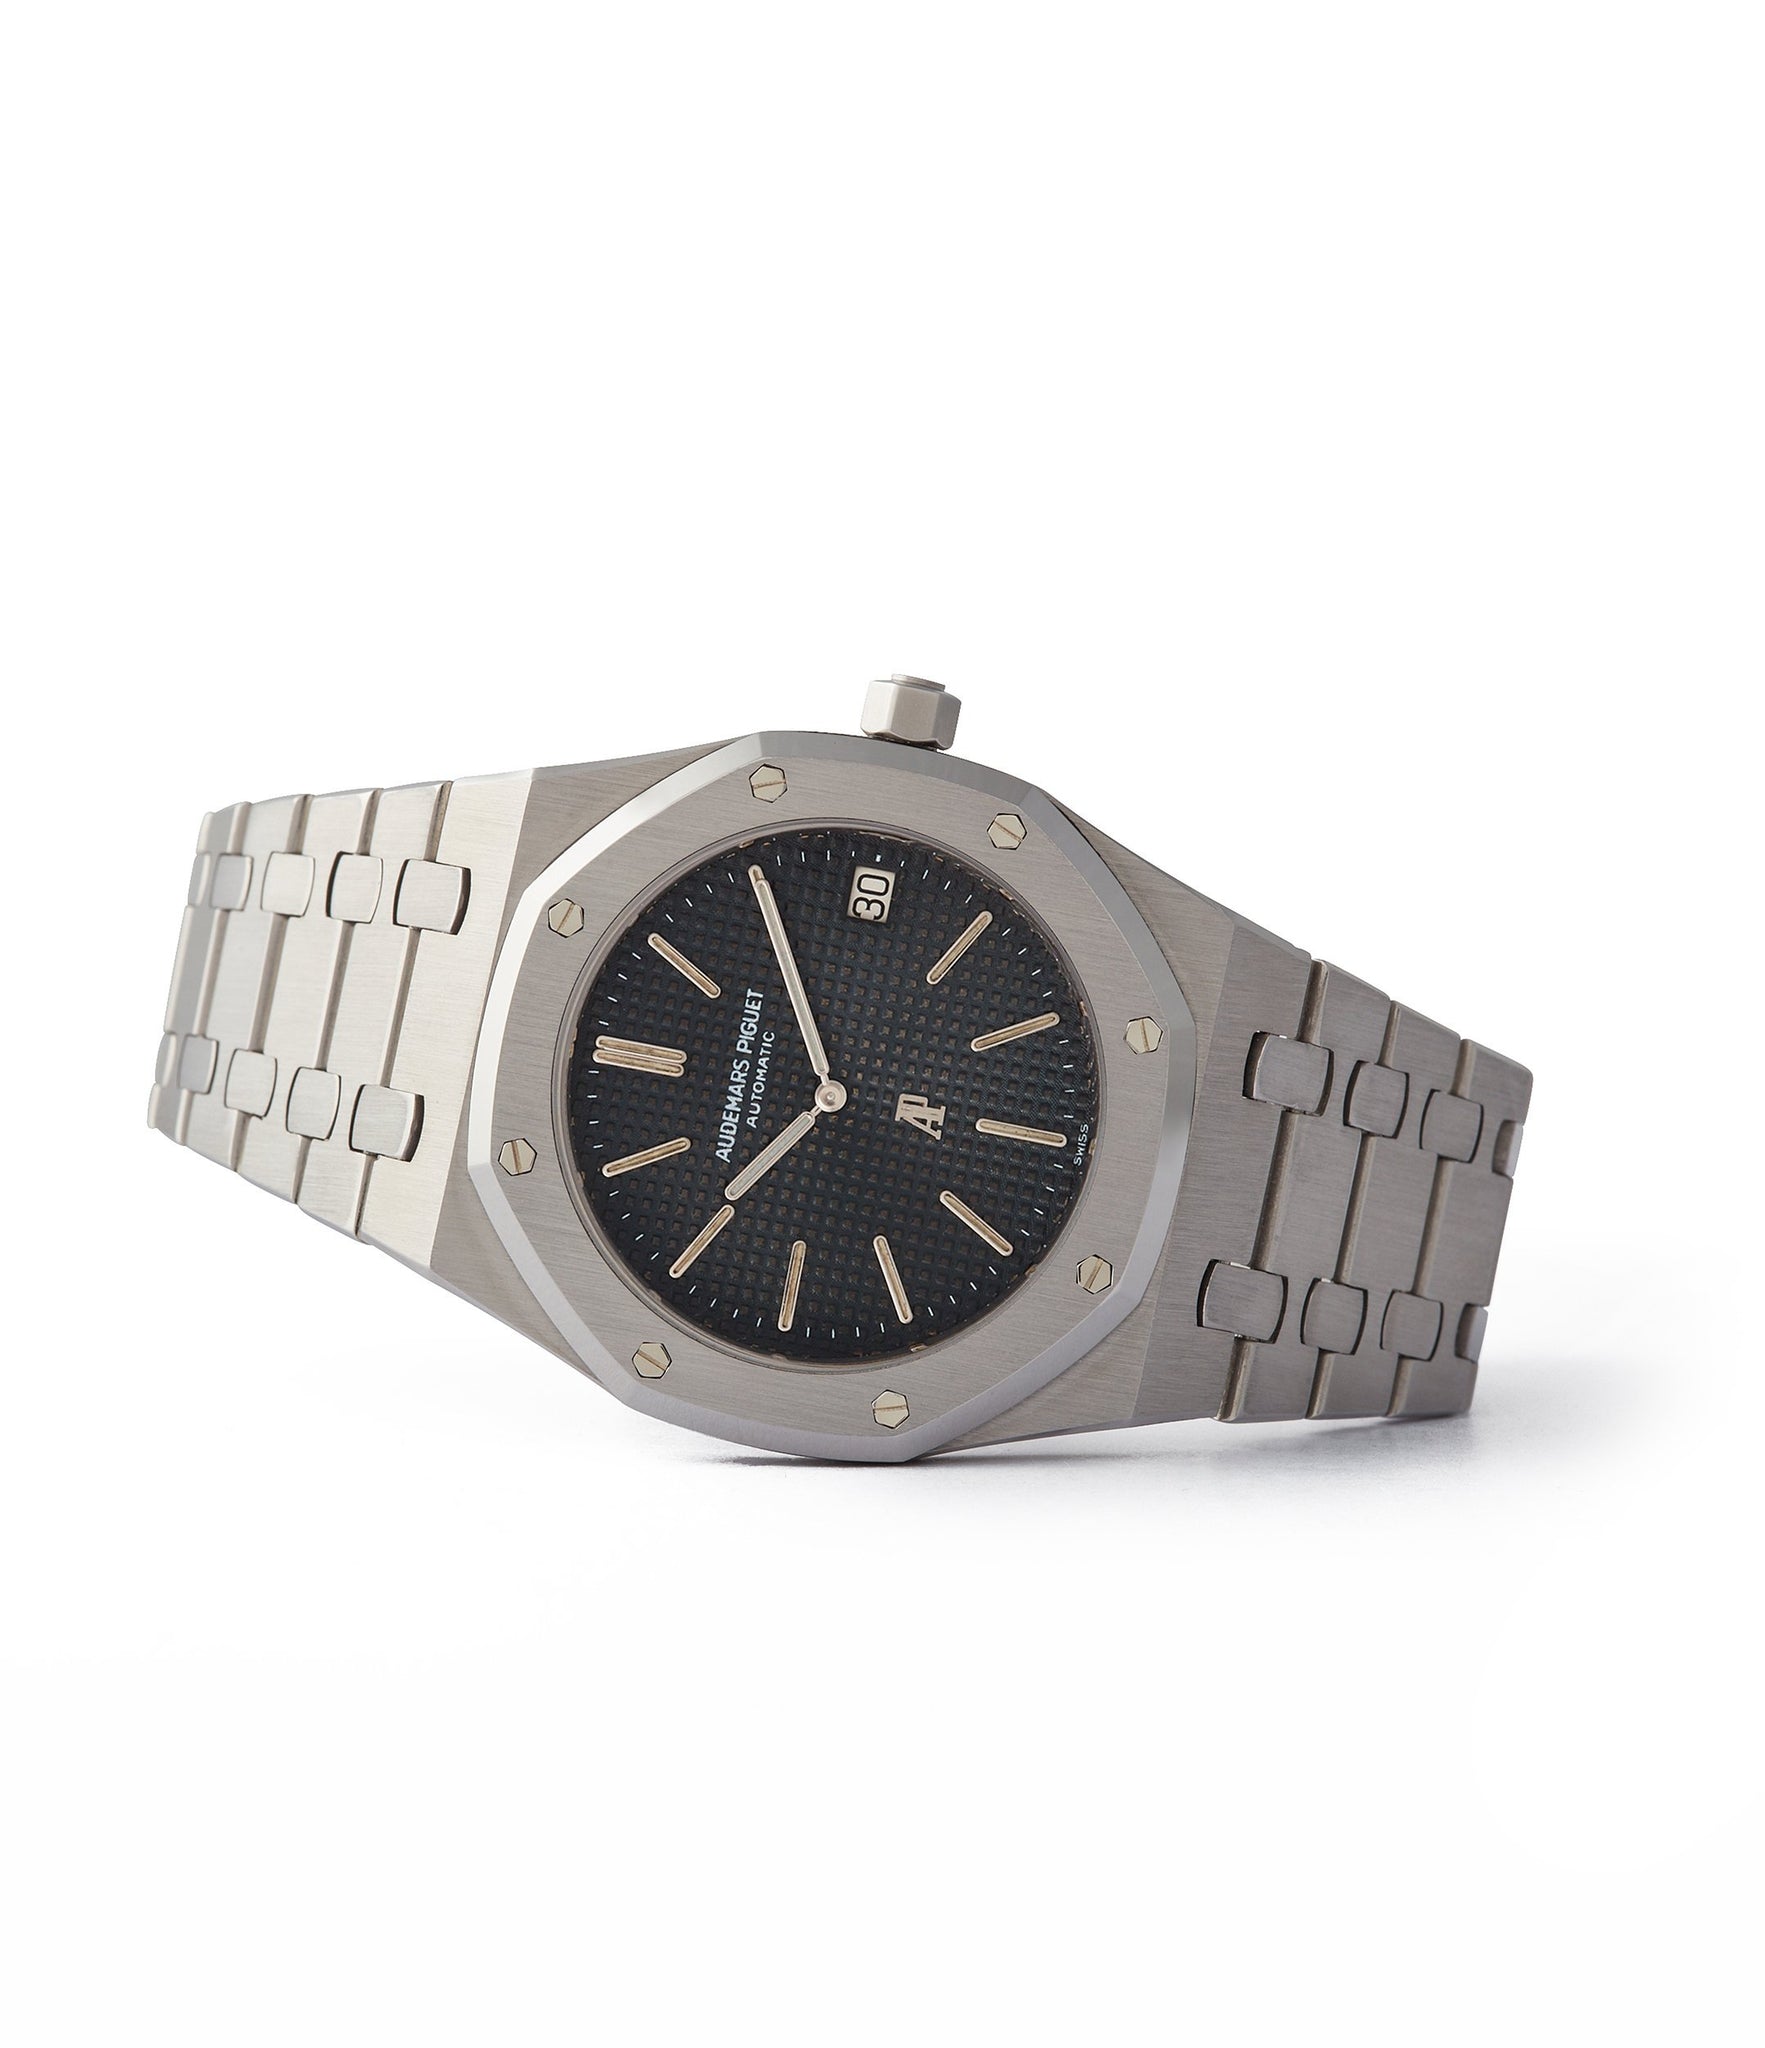 side-shot A-series Audemars Piguet Royal Oak early steel 5402A steel sports luxury watch for sale online A Collected Man London UK specialist rare watches